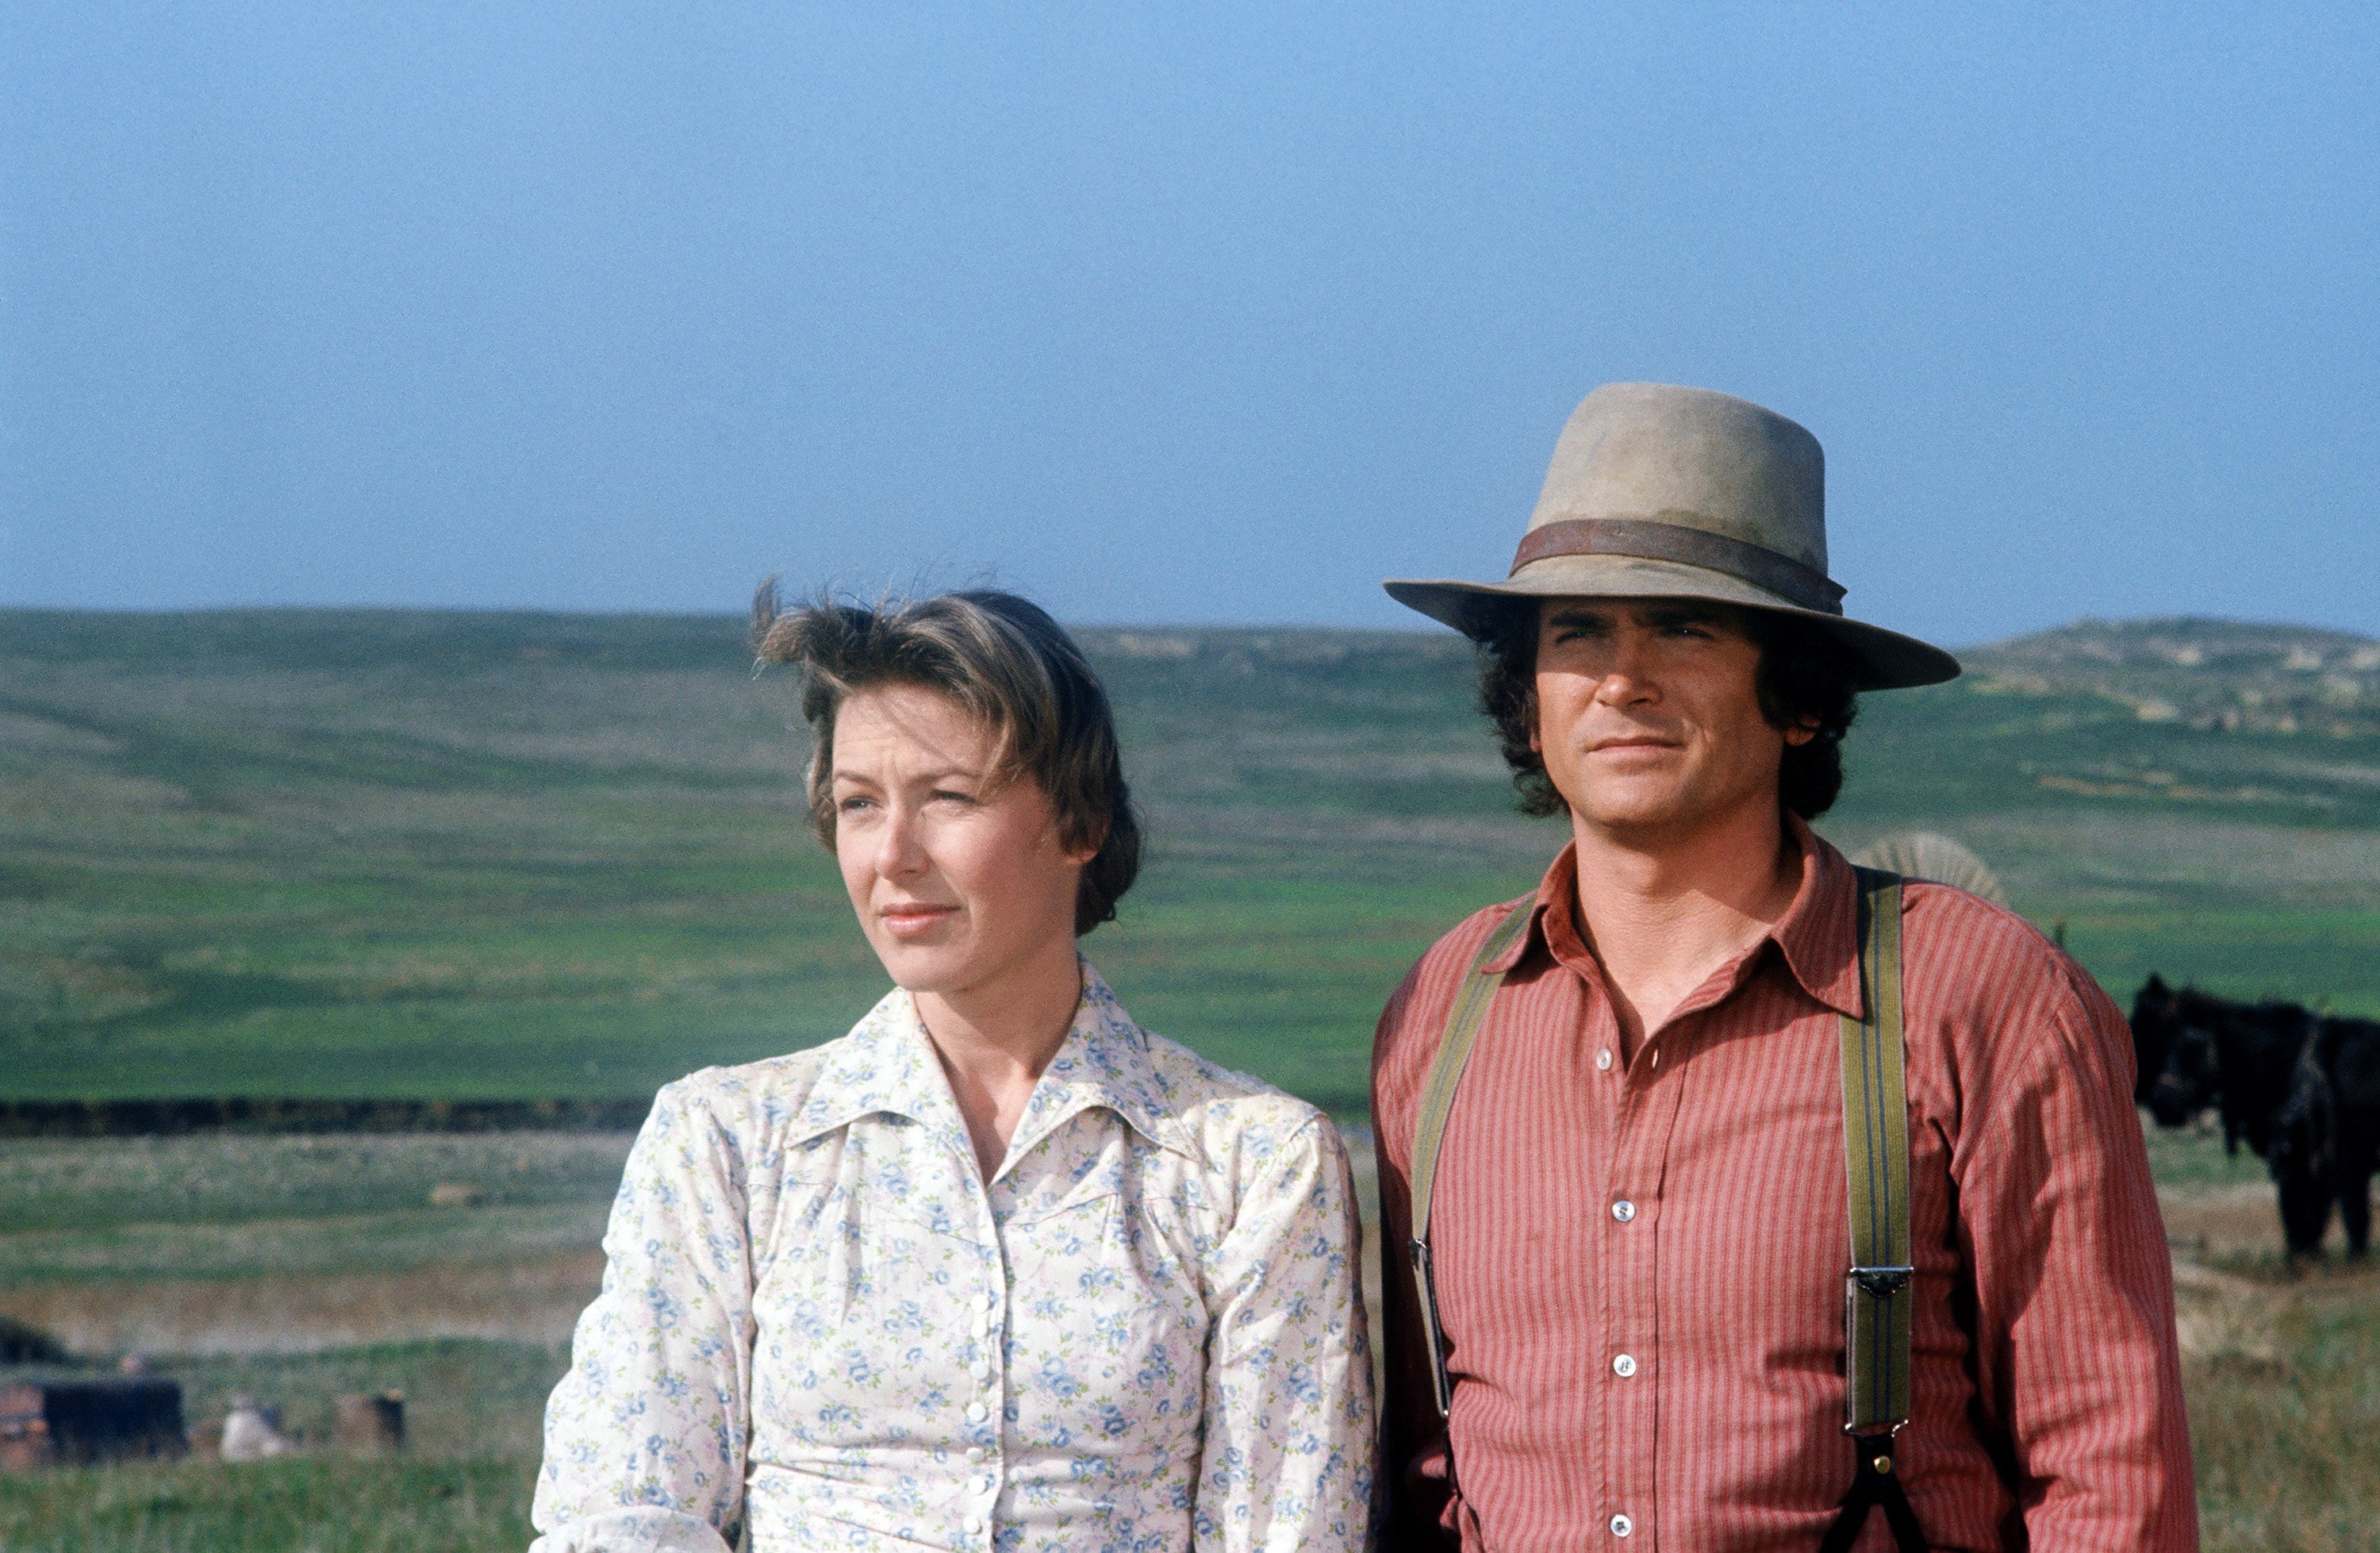 Karen Grassle and Michael Landon standing in a field filming 'Little House on the Prairie.'